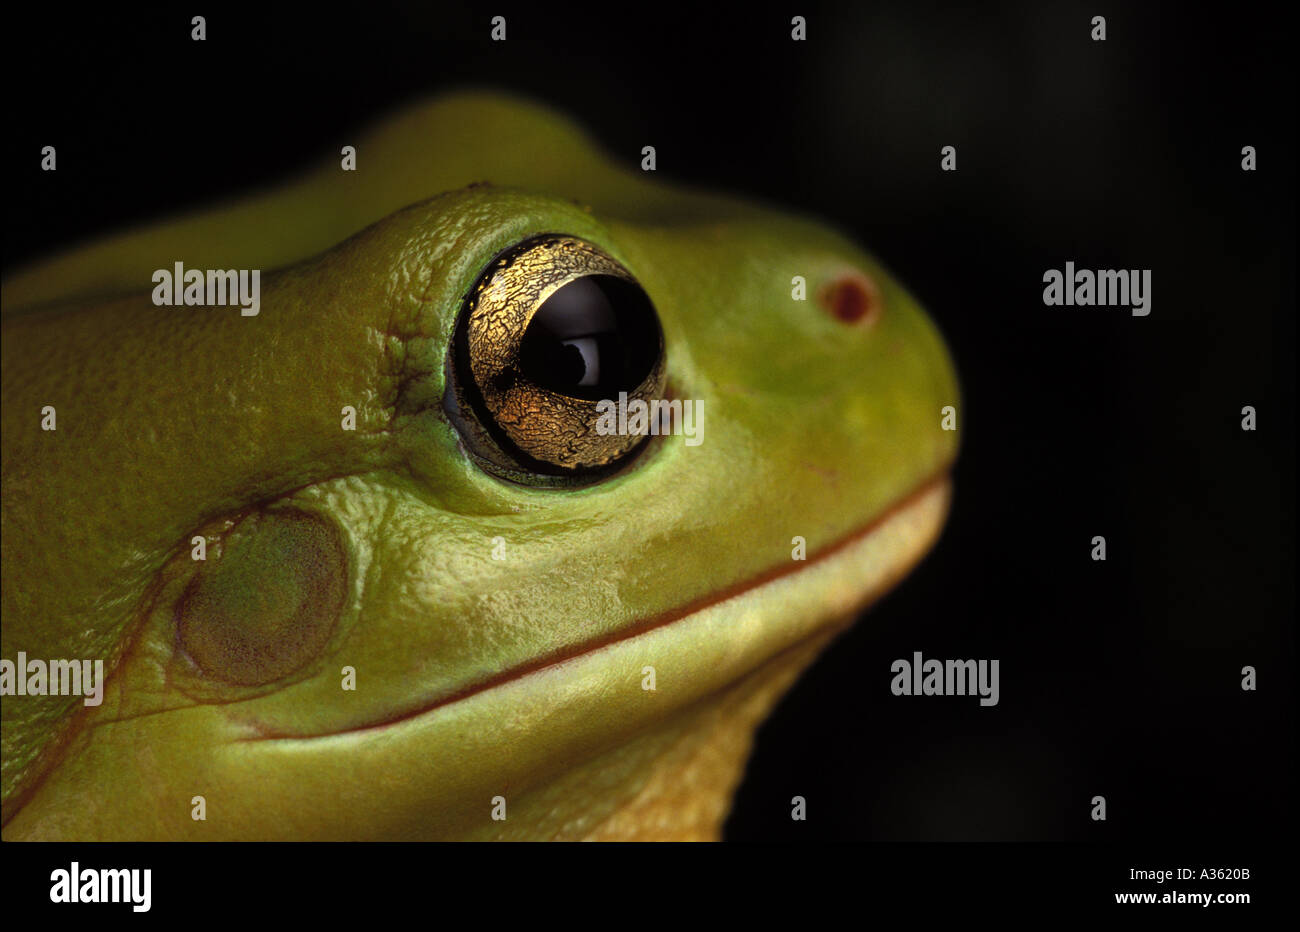 Froggy Style Pictures